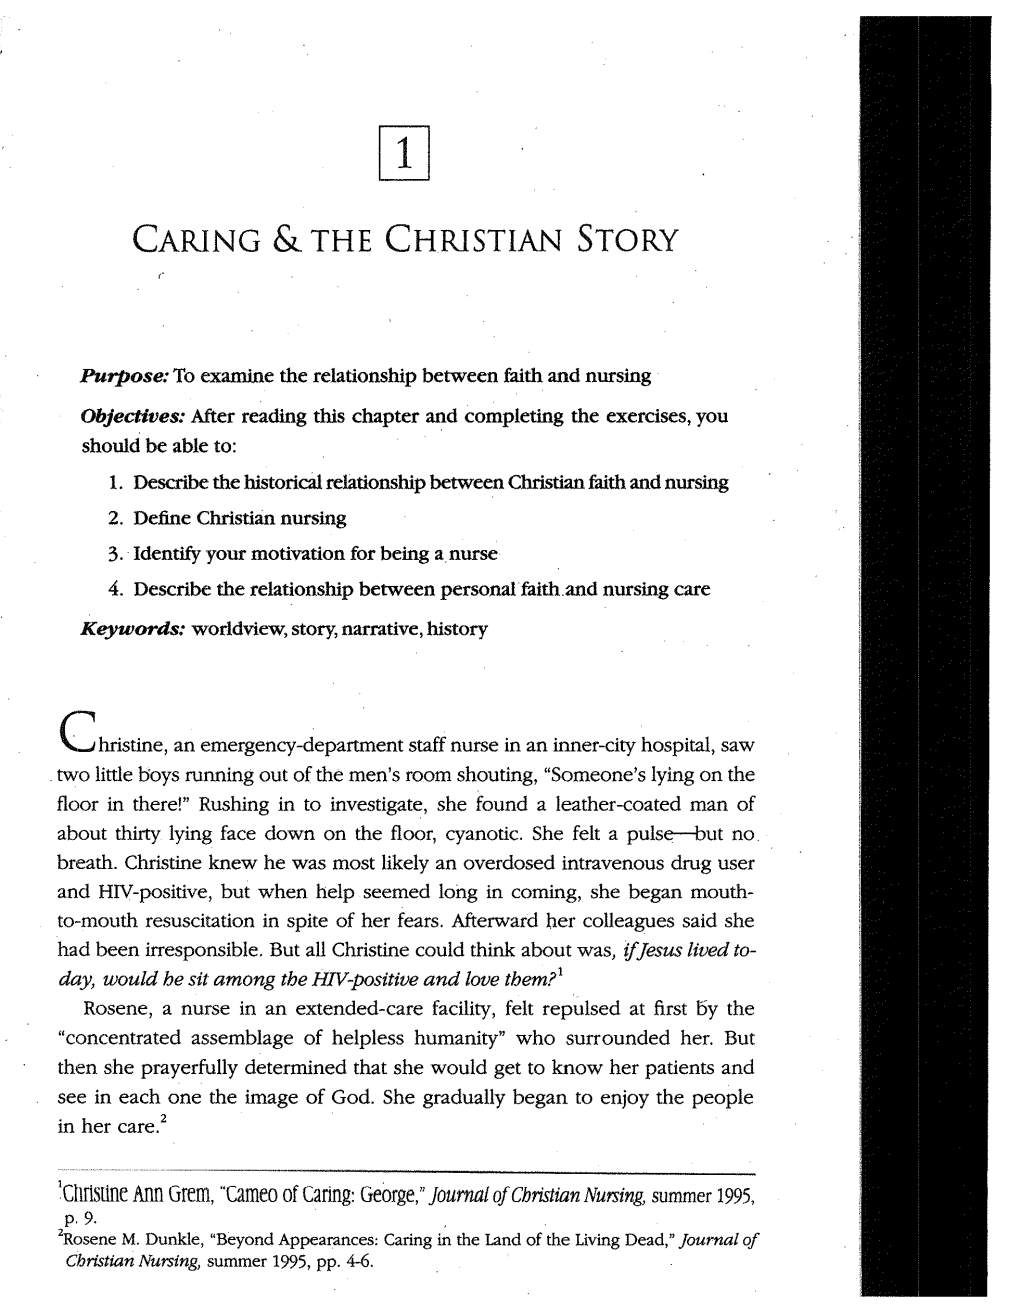 Caring & the Christian Story